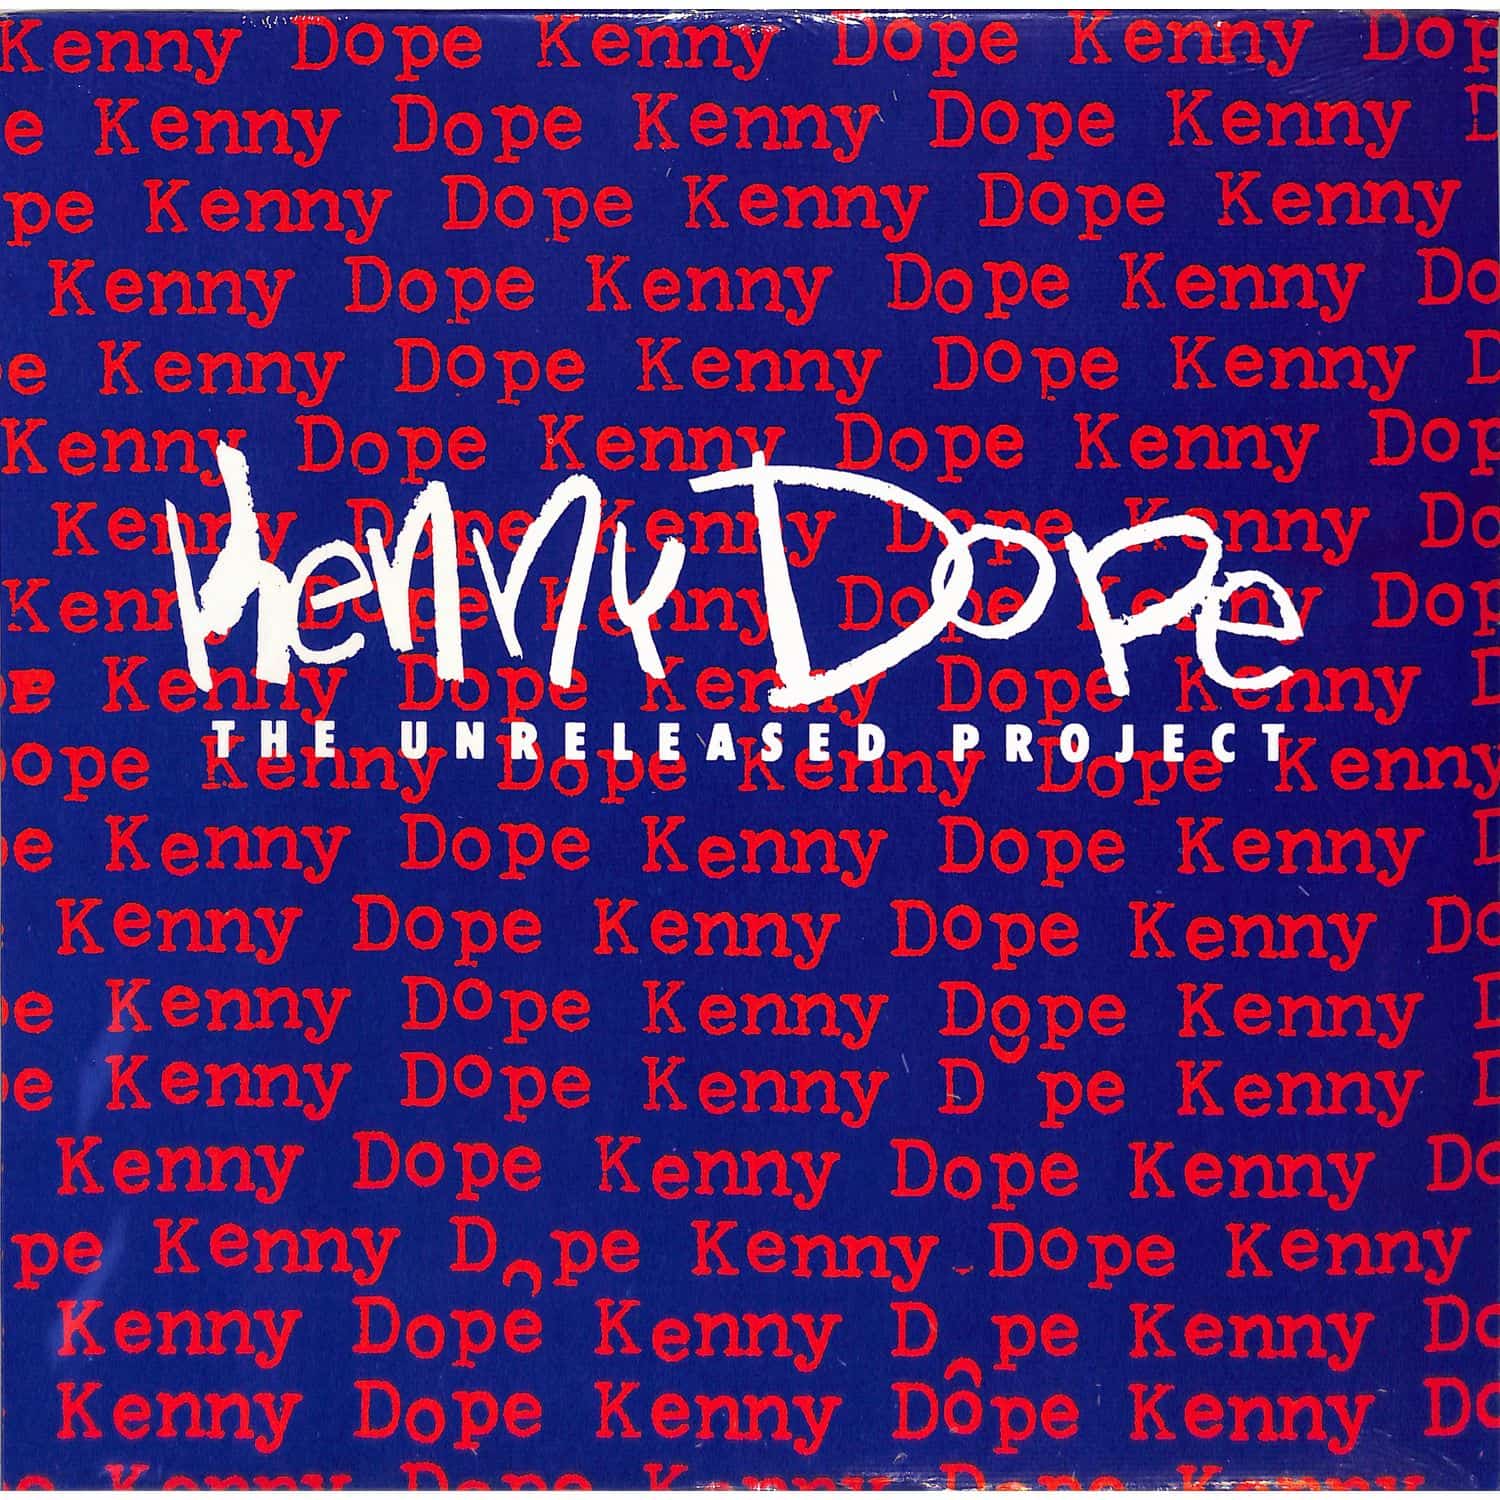 Kenny Dope - UNRELEASED PROJECT